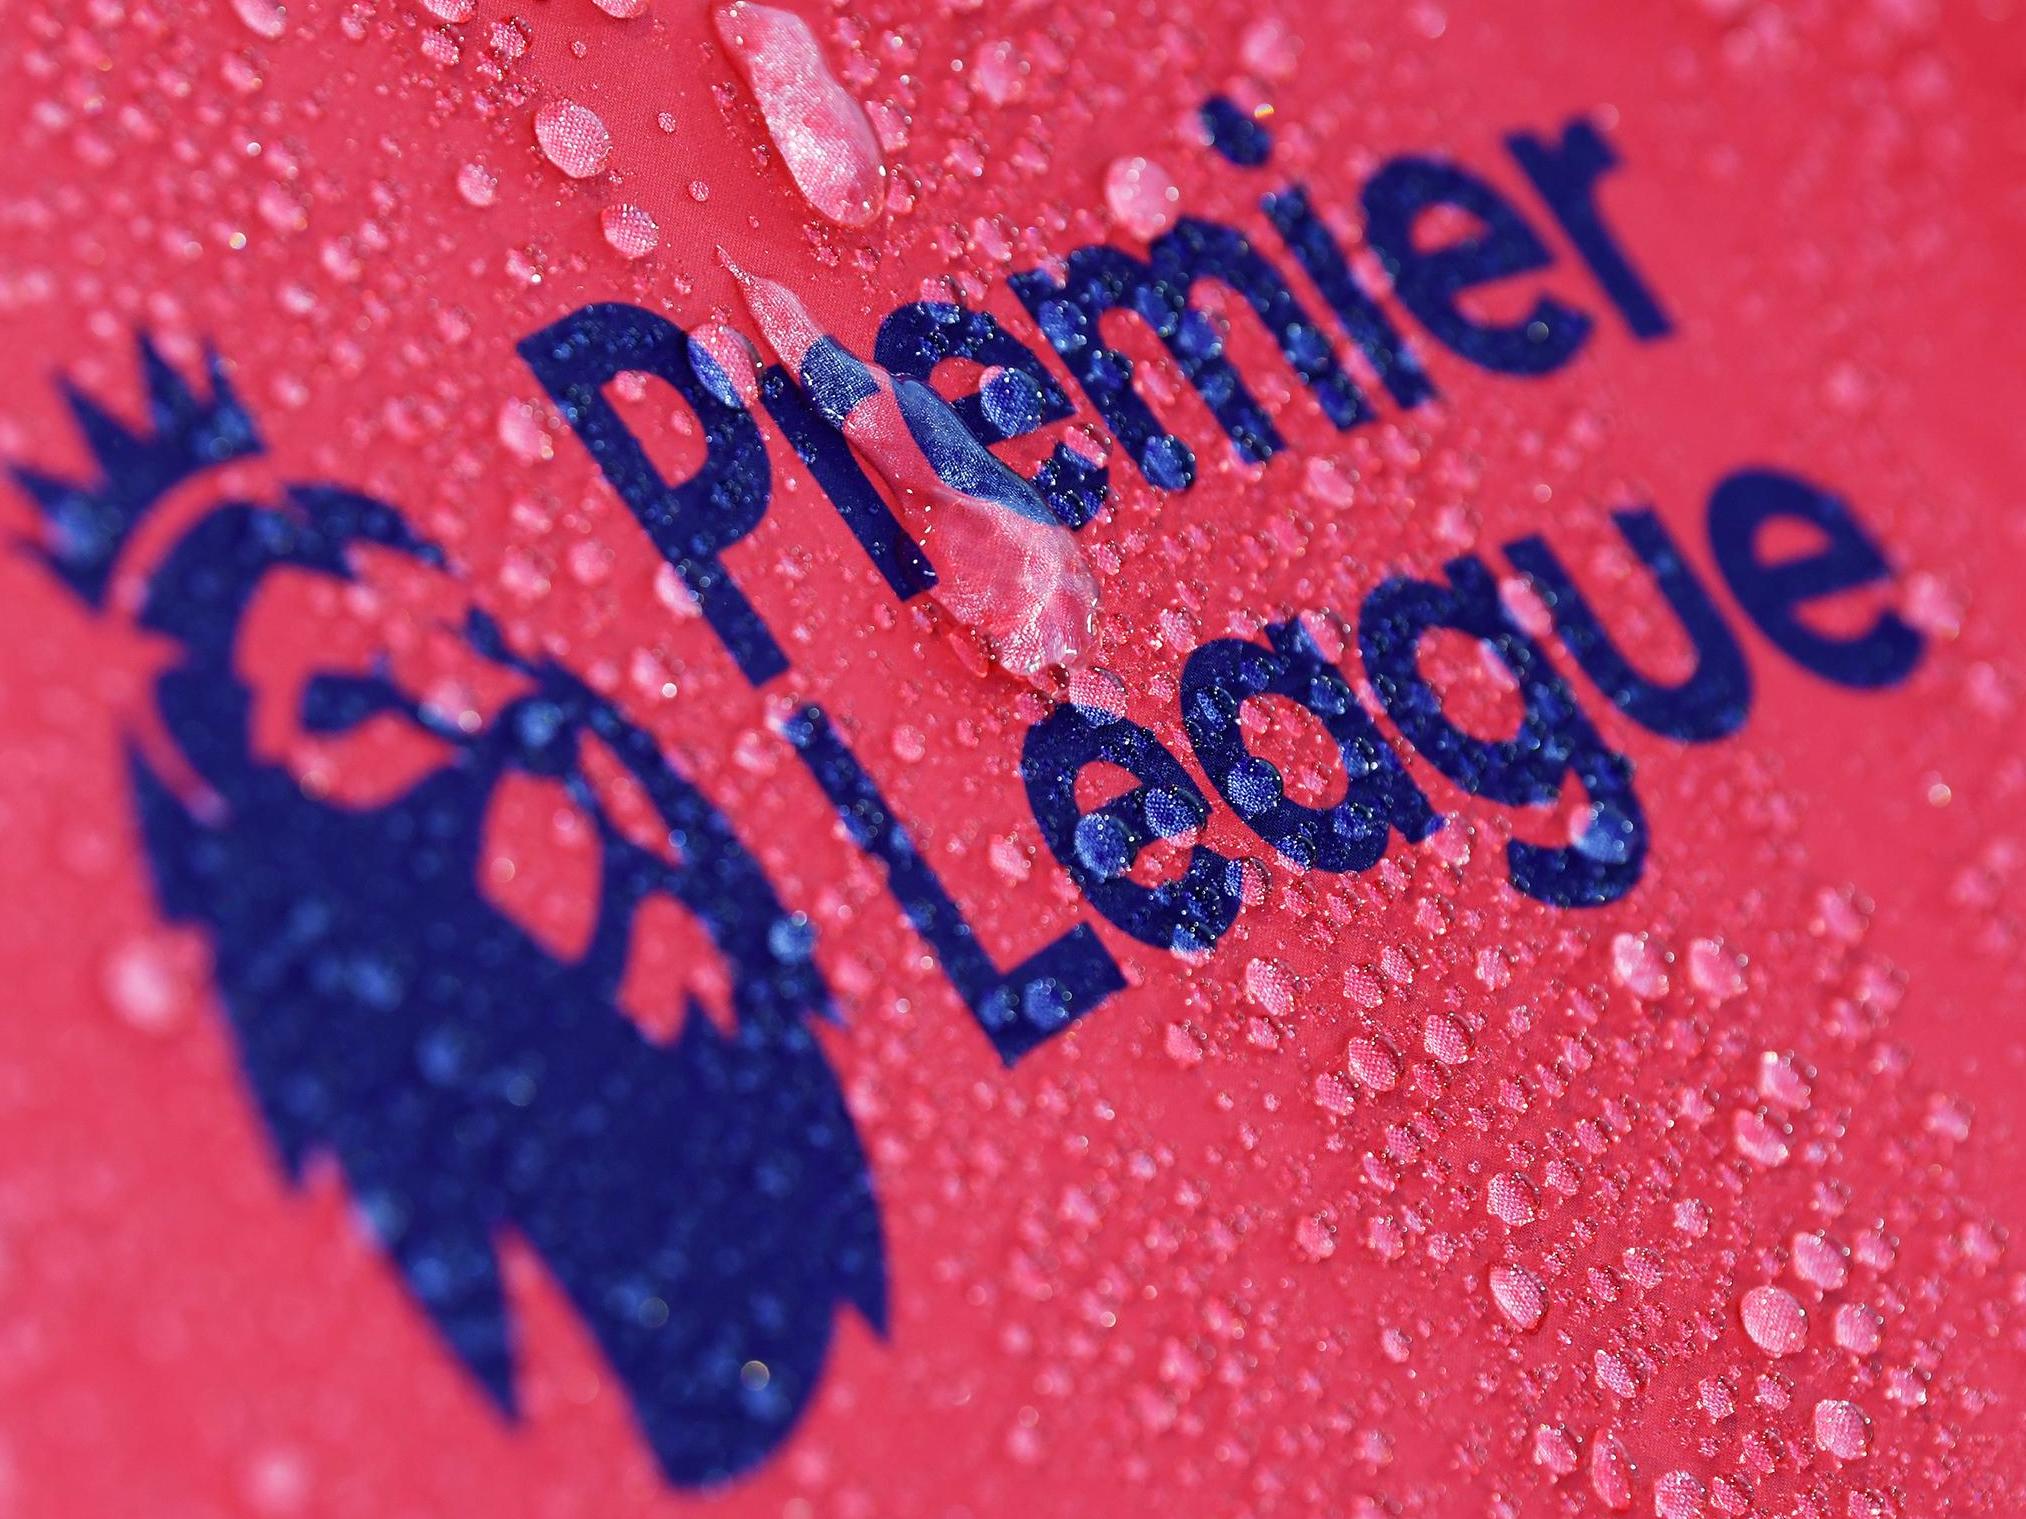 The Premier League contributes over £7bn to the UK economy